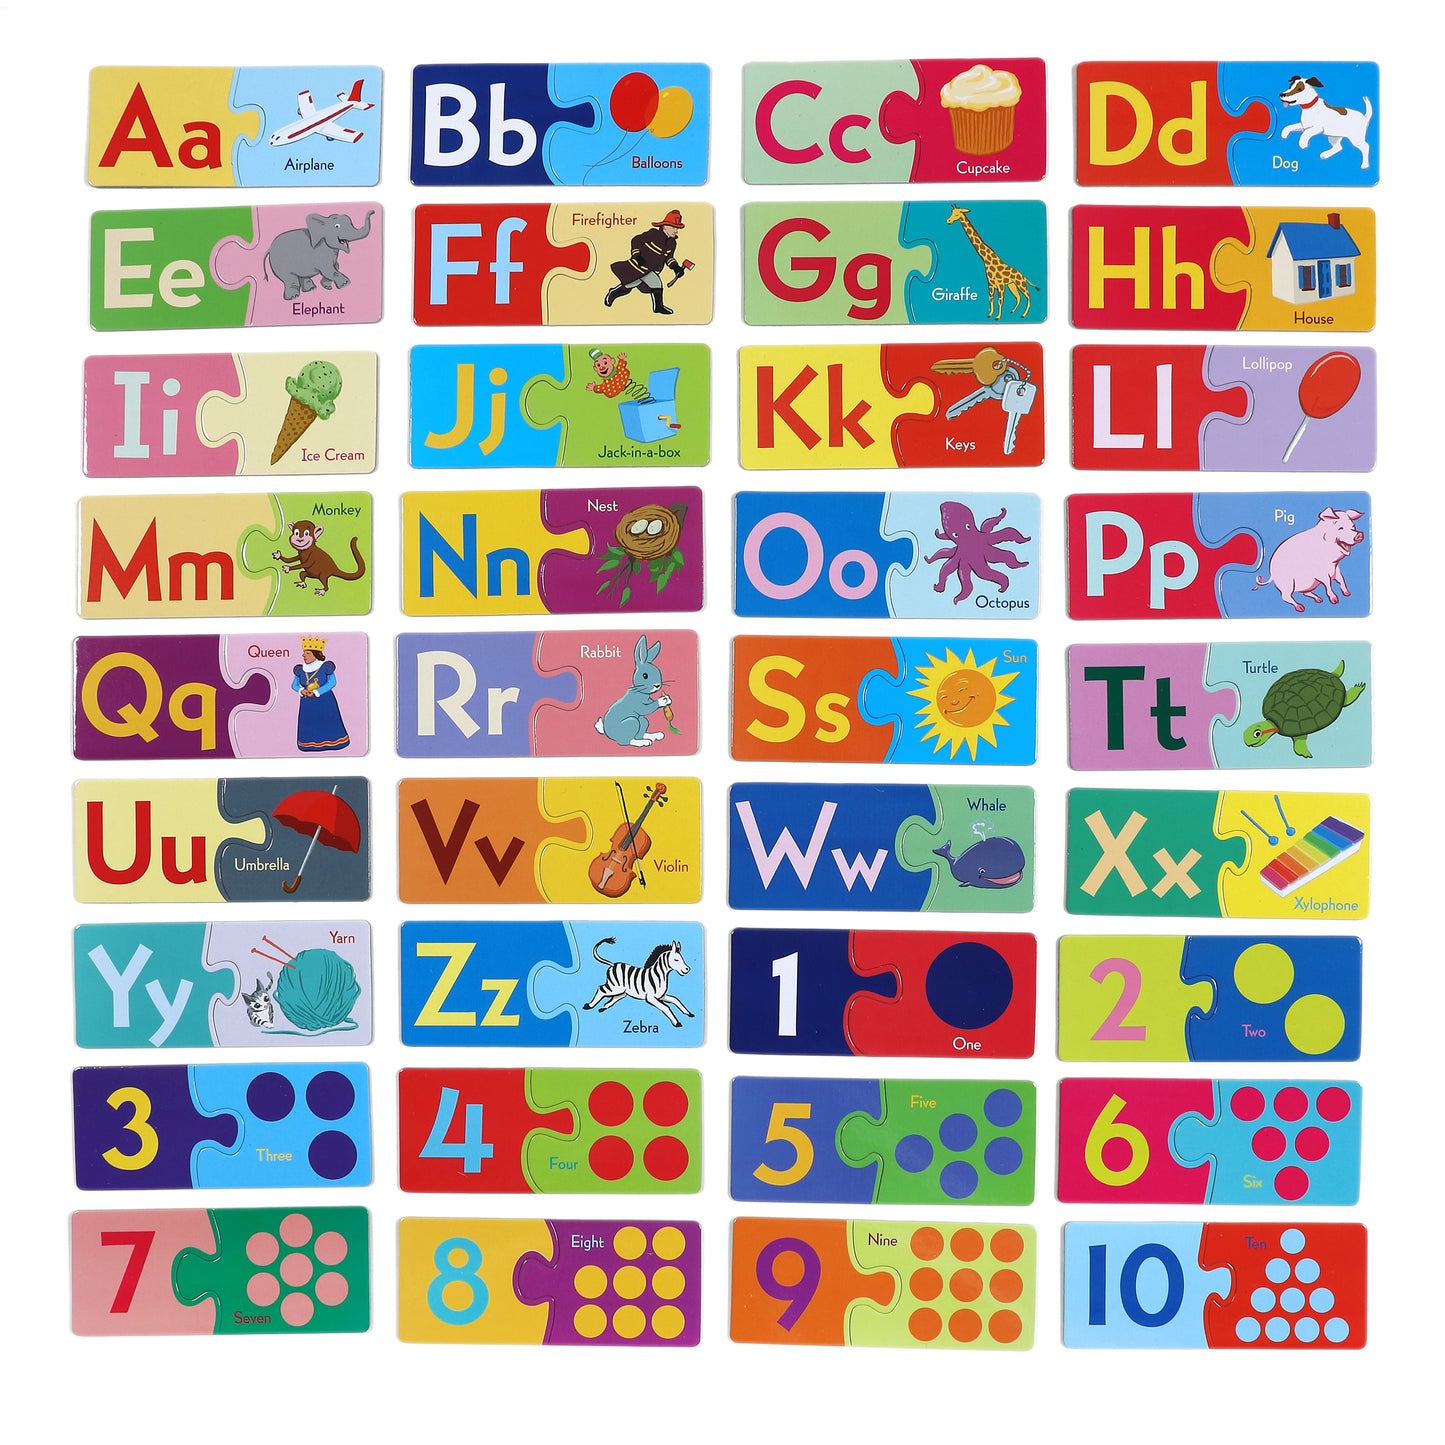 Alphabet & Numbers ABC Award Winning Puzzle Pairs eeBoo  Kids Ages 3+